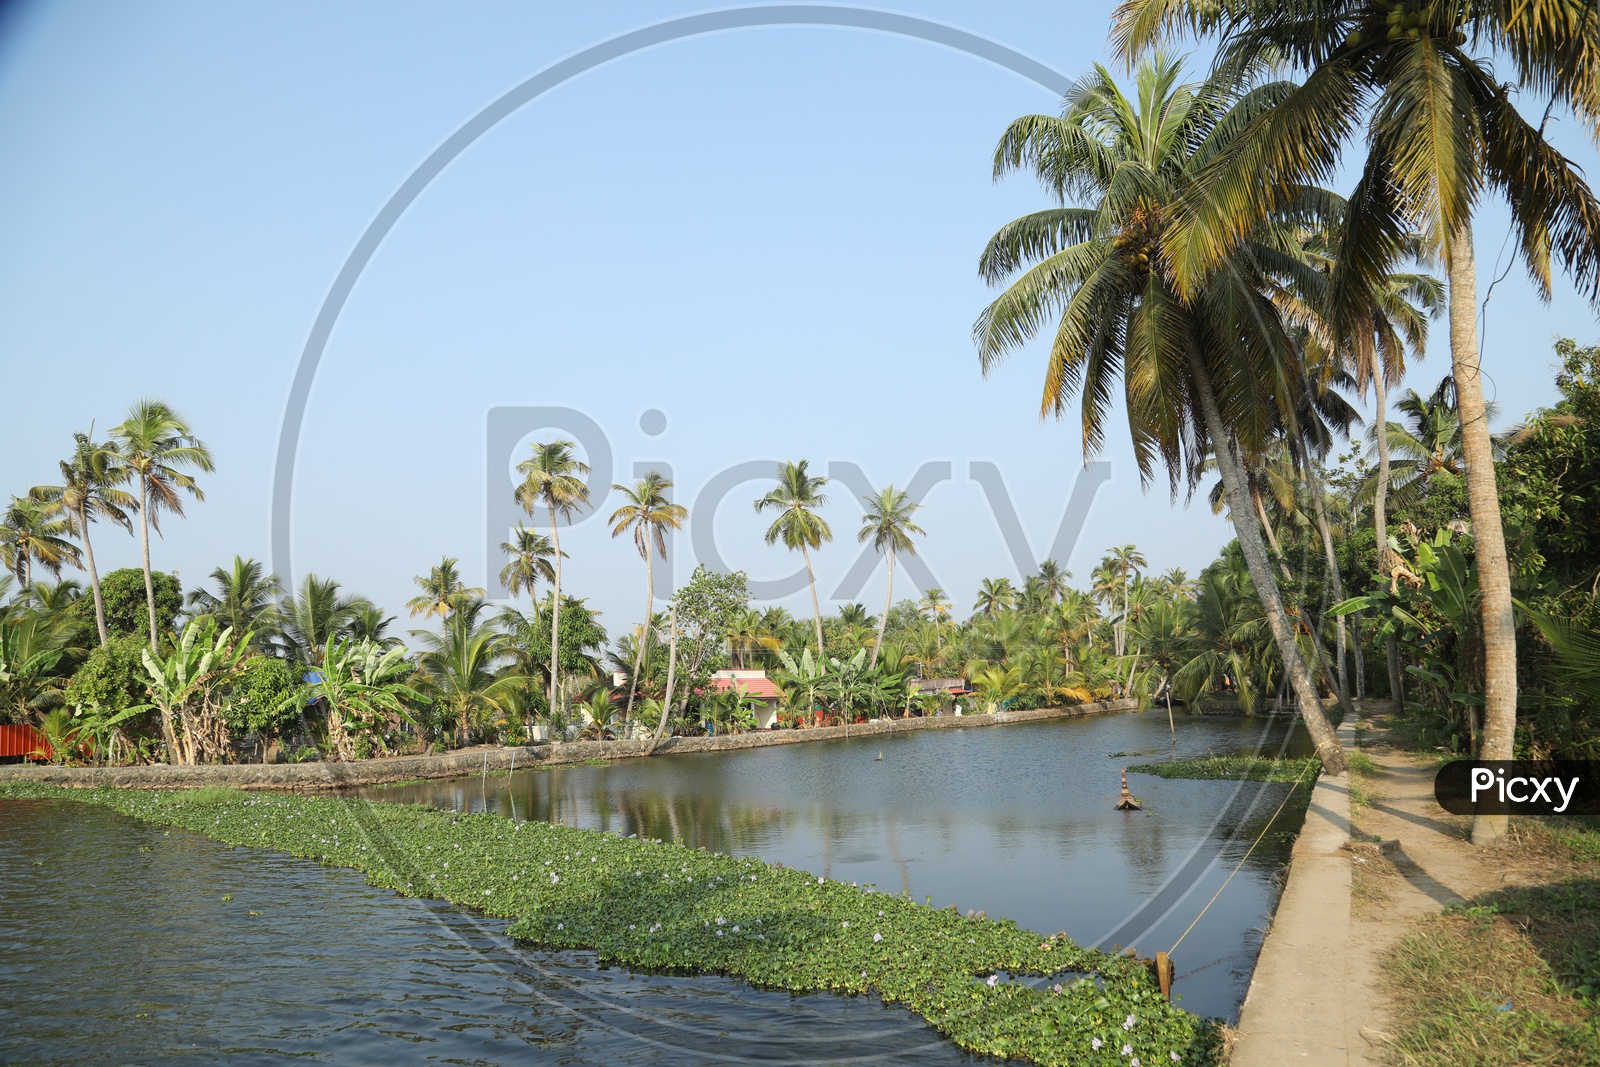 Lake with coconut trees on both sides